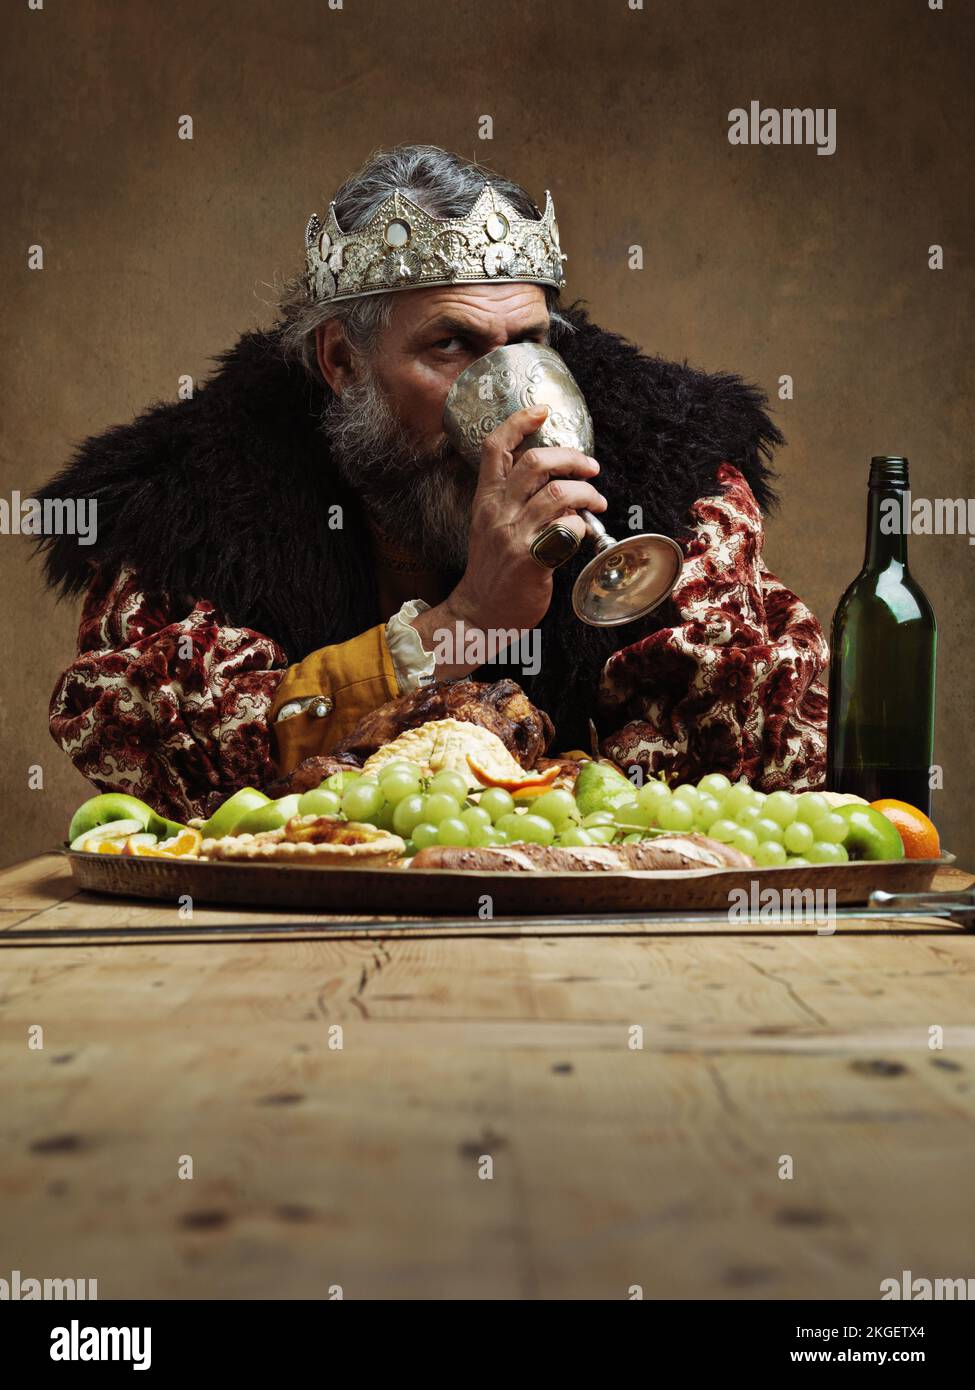 Drink deep to ease the woes of rule. A mature king feasting alone in a banquet hall. Stock Photo